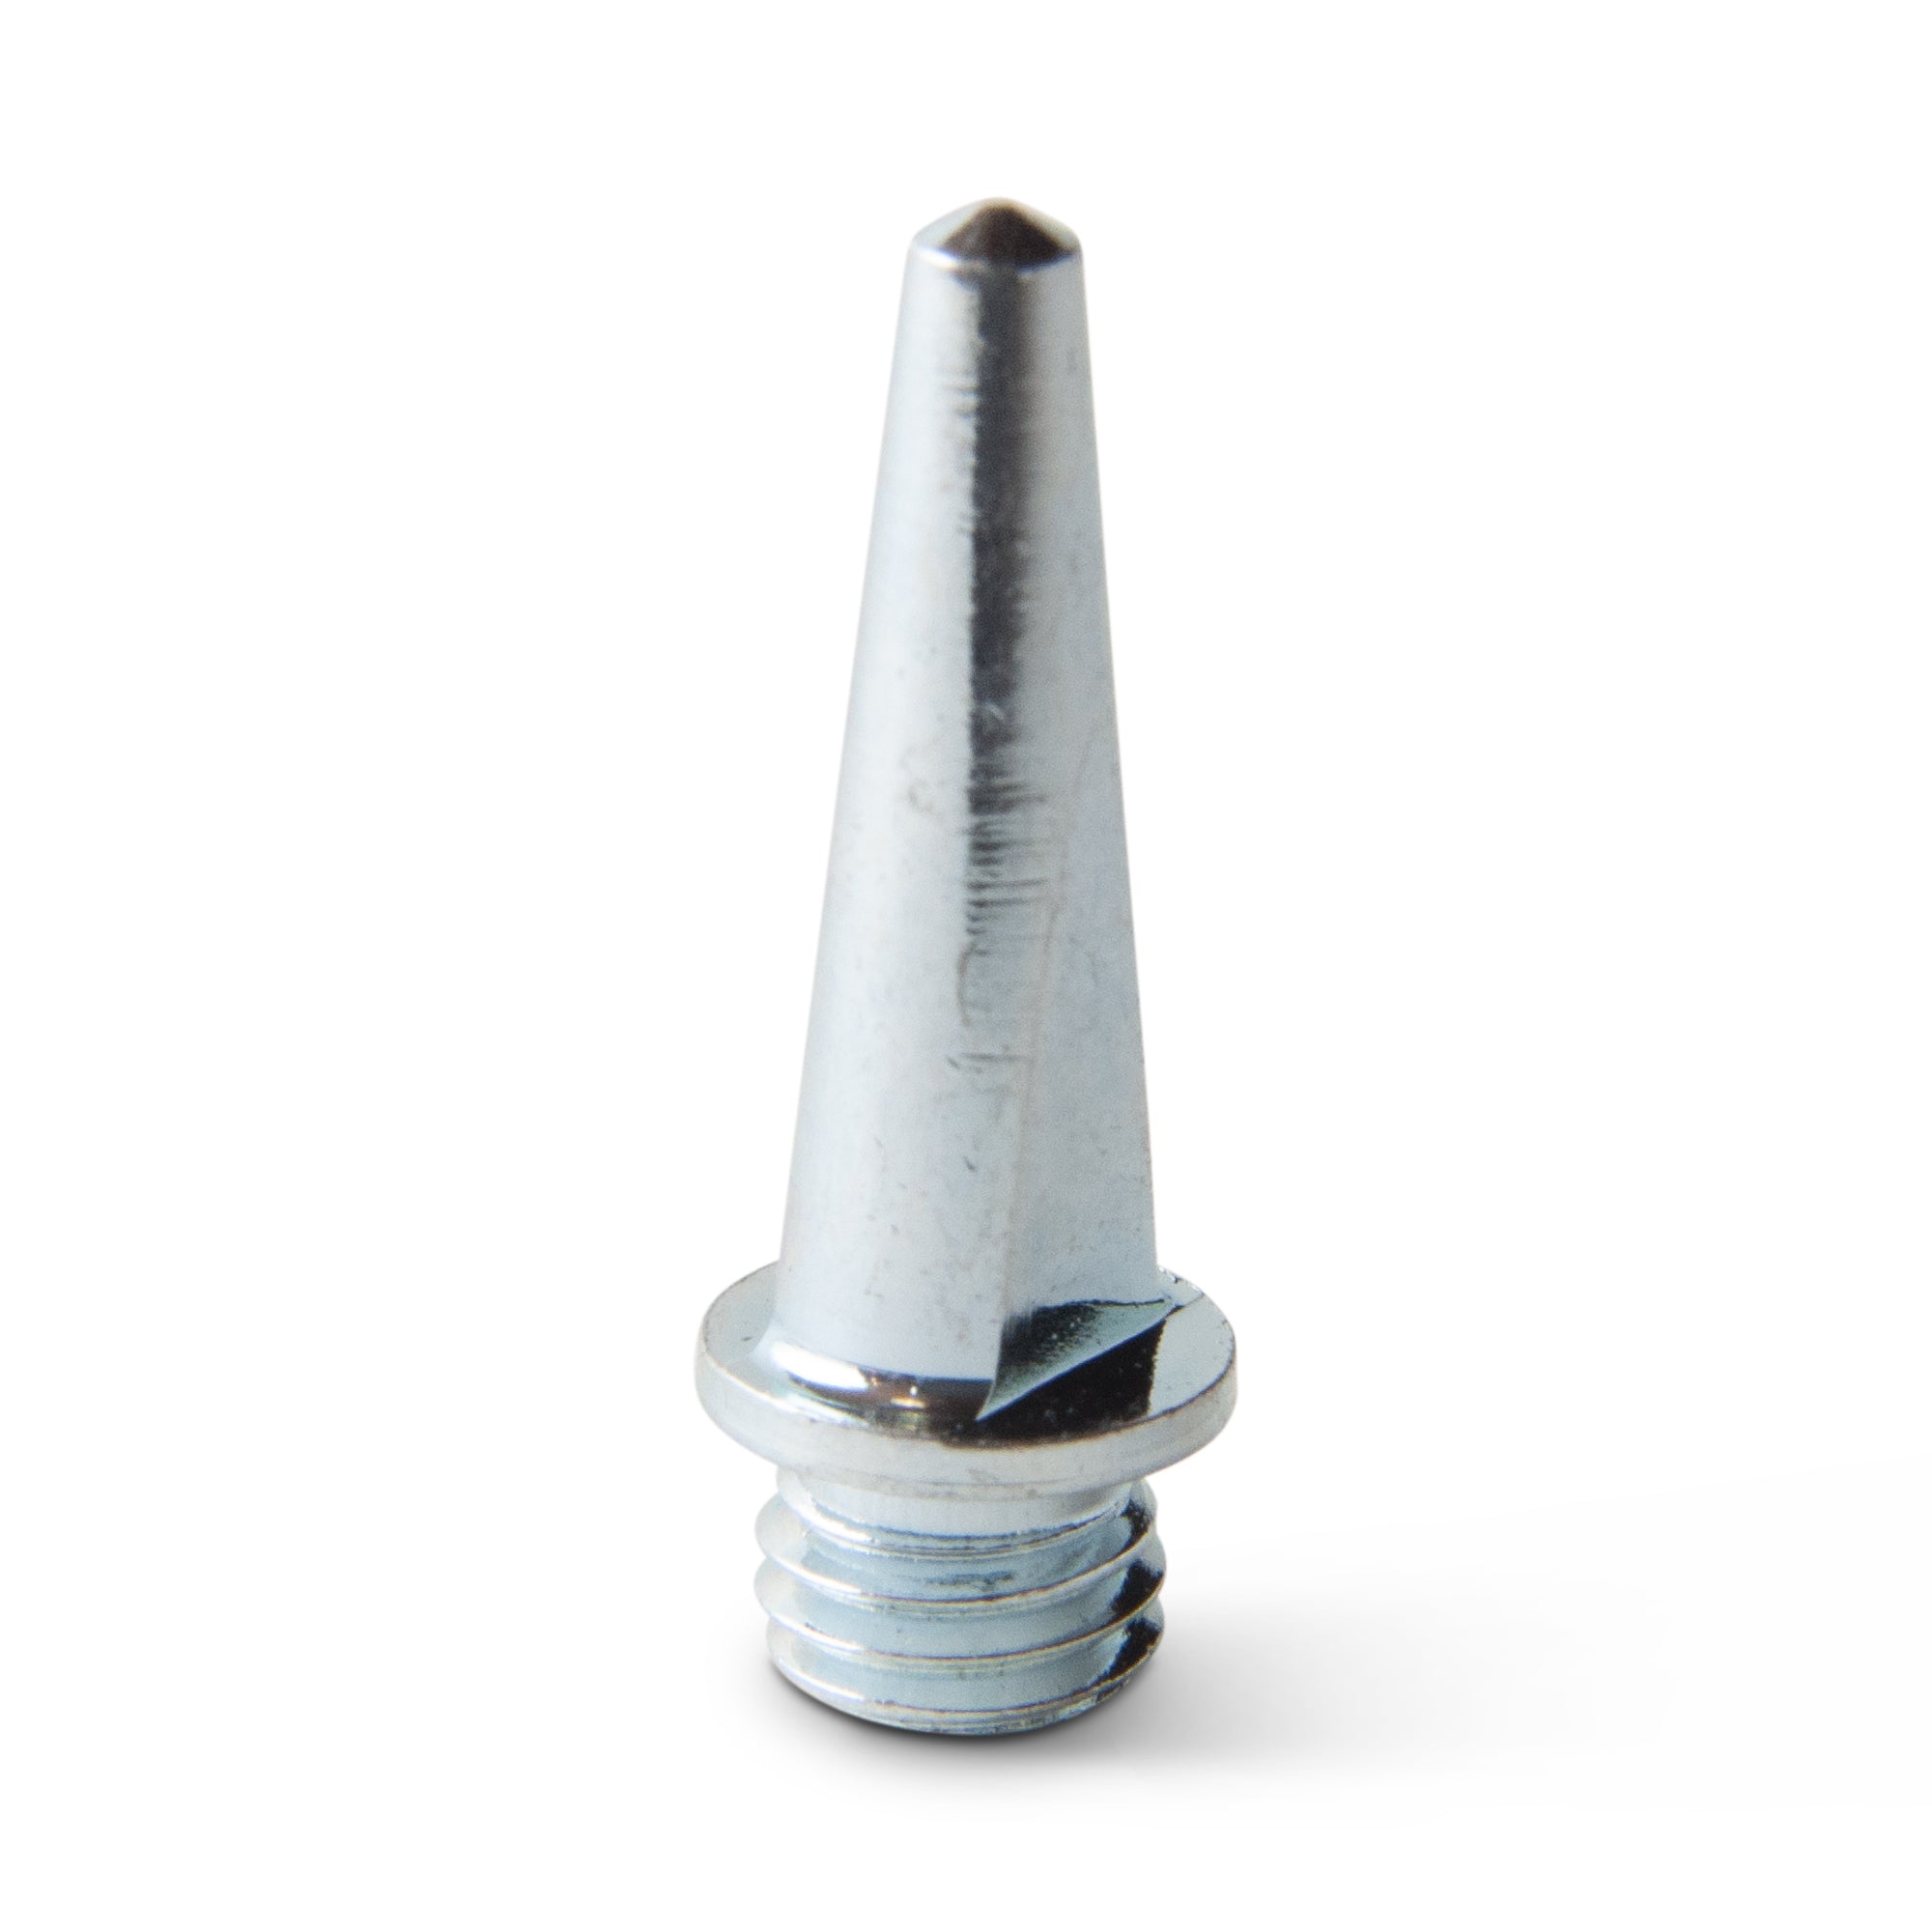 Steel pyramid spikes for athletics - 15mm